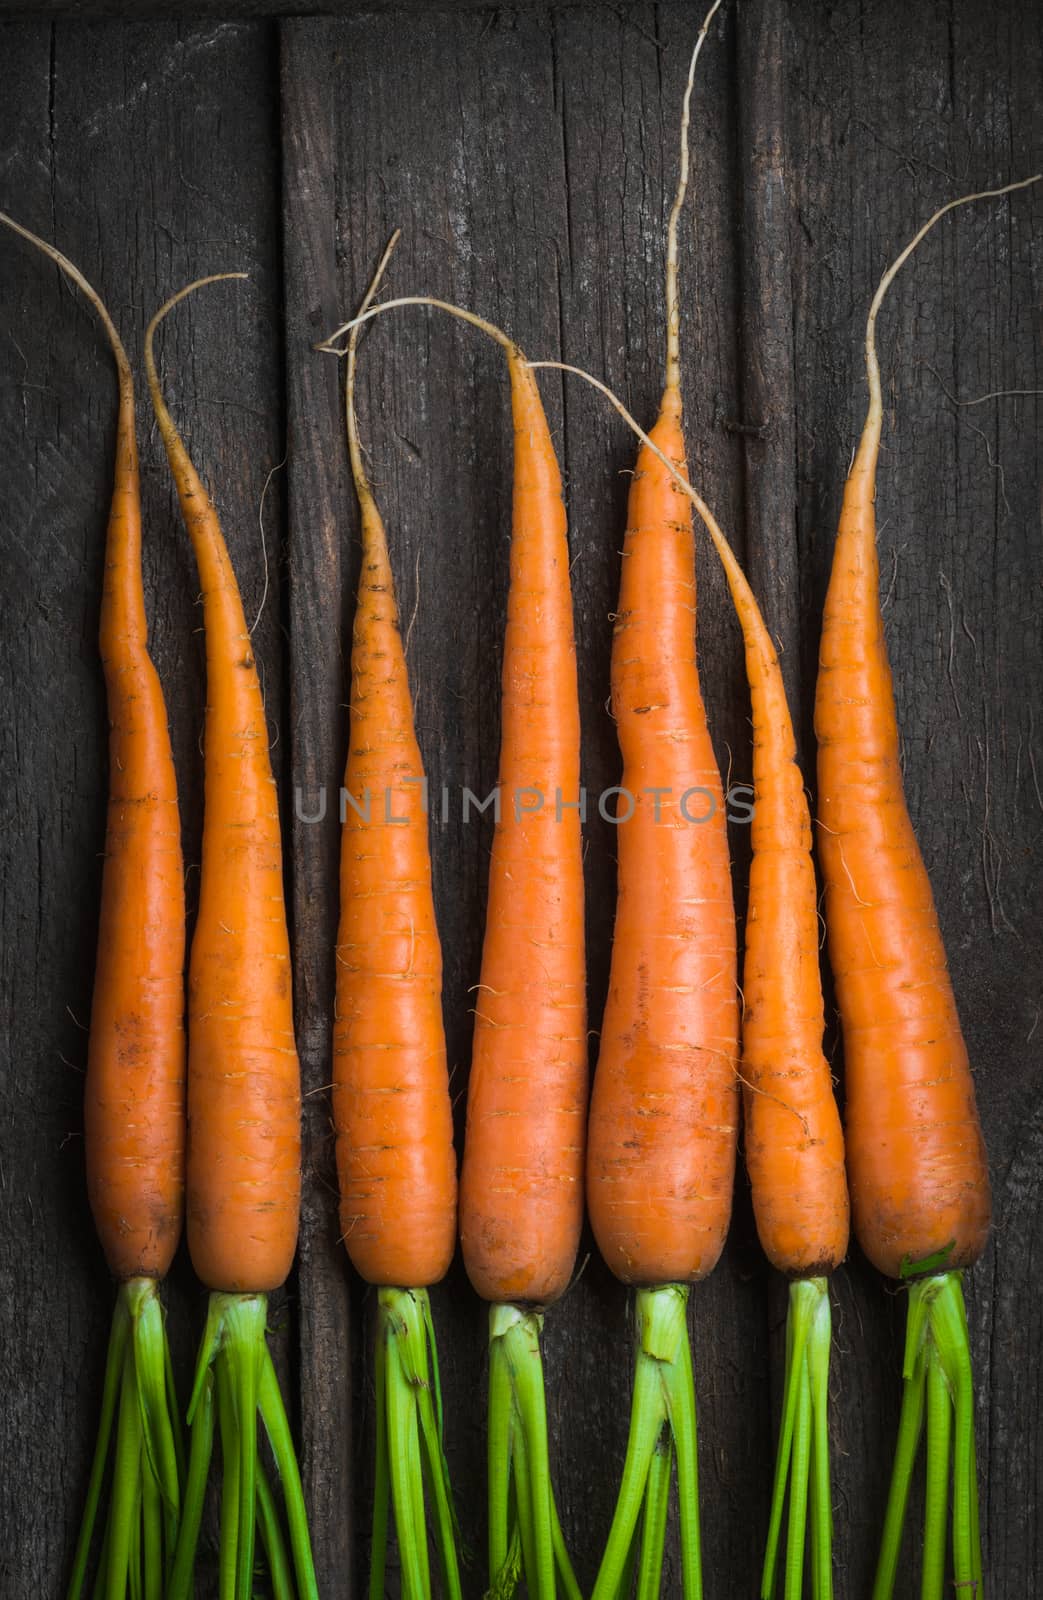 Fresh young carrots by iprachenko